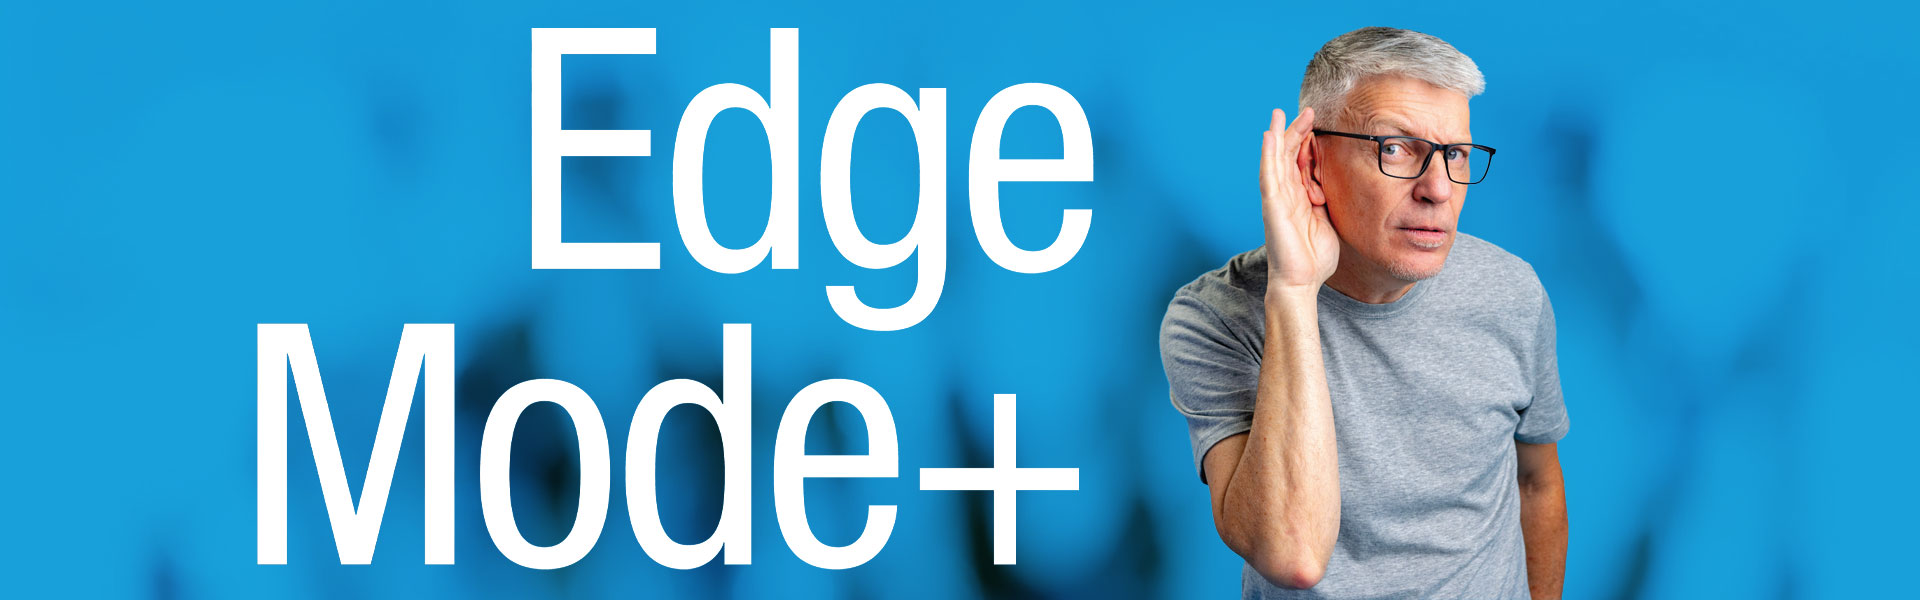 Edge Mode+: On-demand processing improves speech recognition and listening effort in hearing-aid users